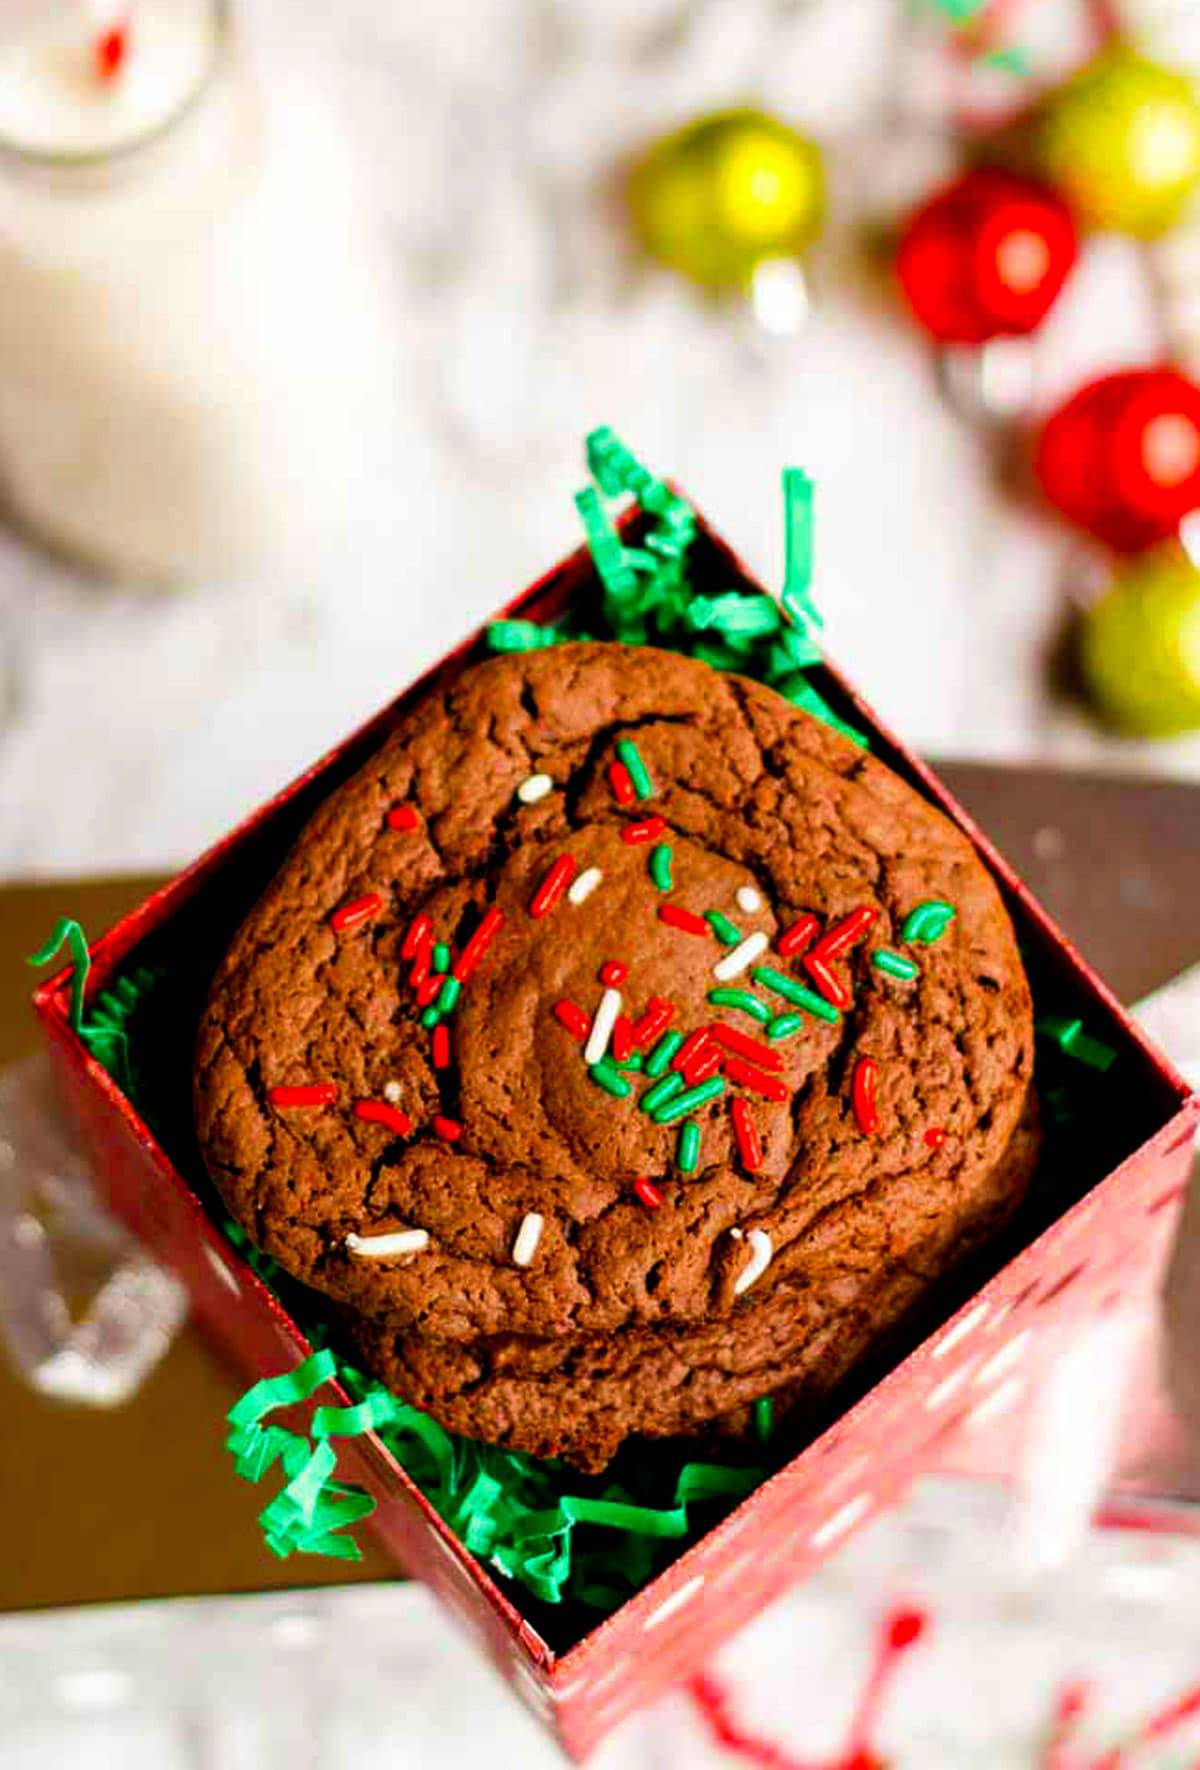 Some chocolate cookies in a holiday gift bag.